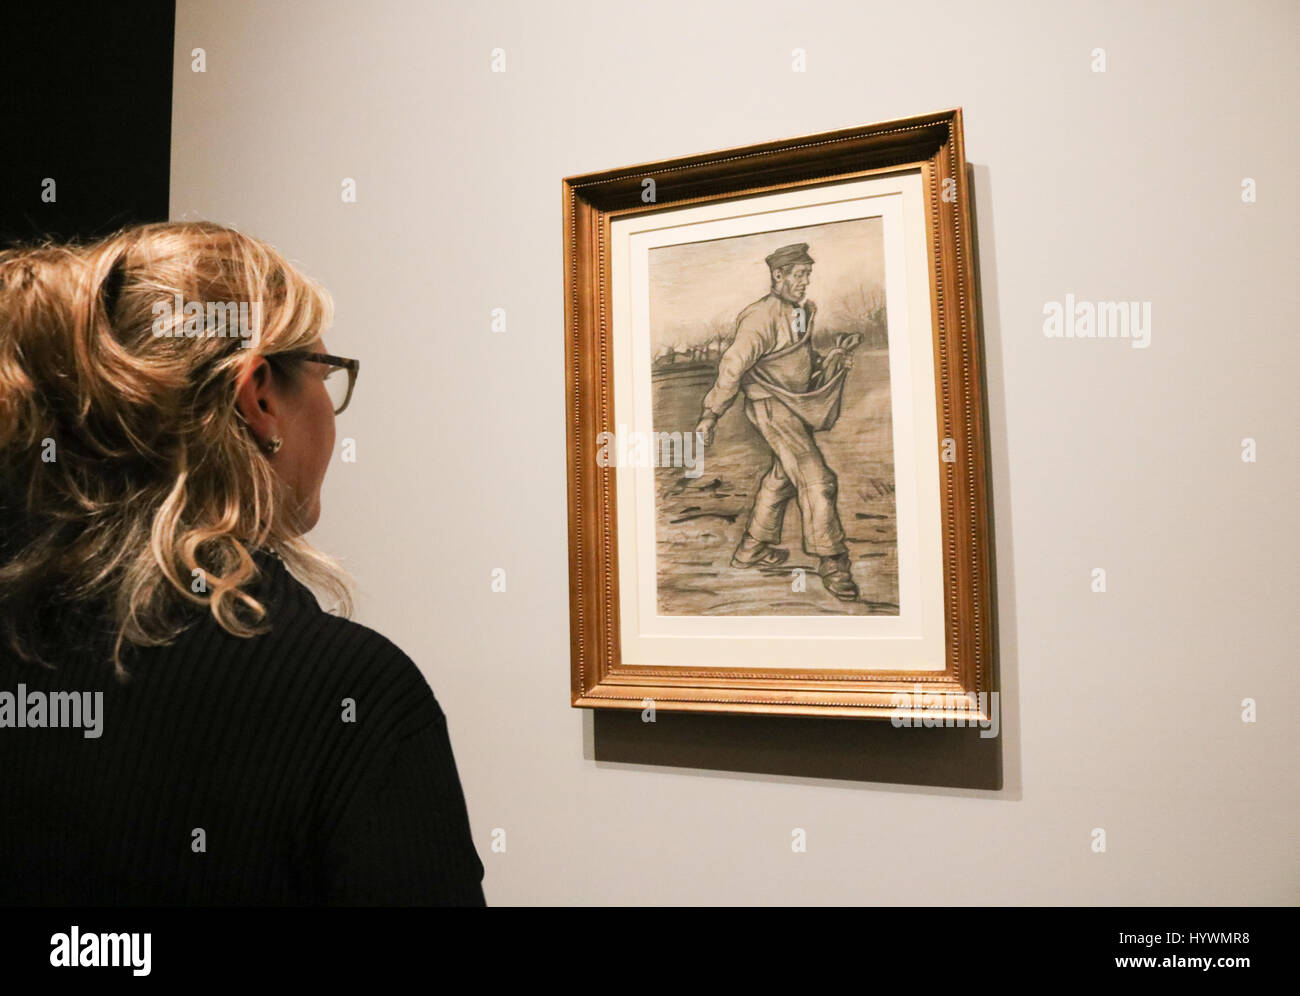 Melbourne, Australia. 27th Apr, 2017. The Sower: A preview of Van Gogh and the Seasons exhibition at the National Gallery of Victoria featuring major artworks of Dutch impressionist Vincent Van Gogh reflecting the four seasons Credit: amer ghazzal/Alamy Live News Stock Photo